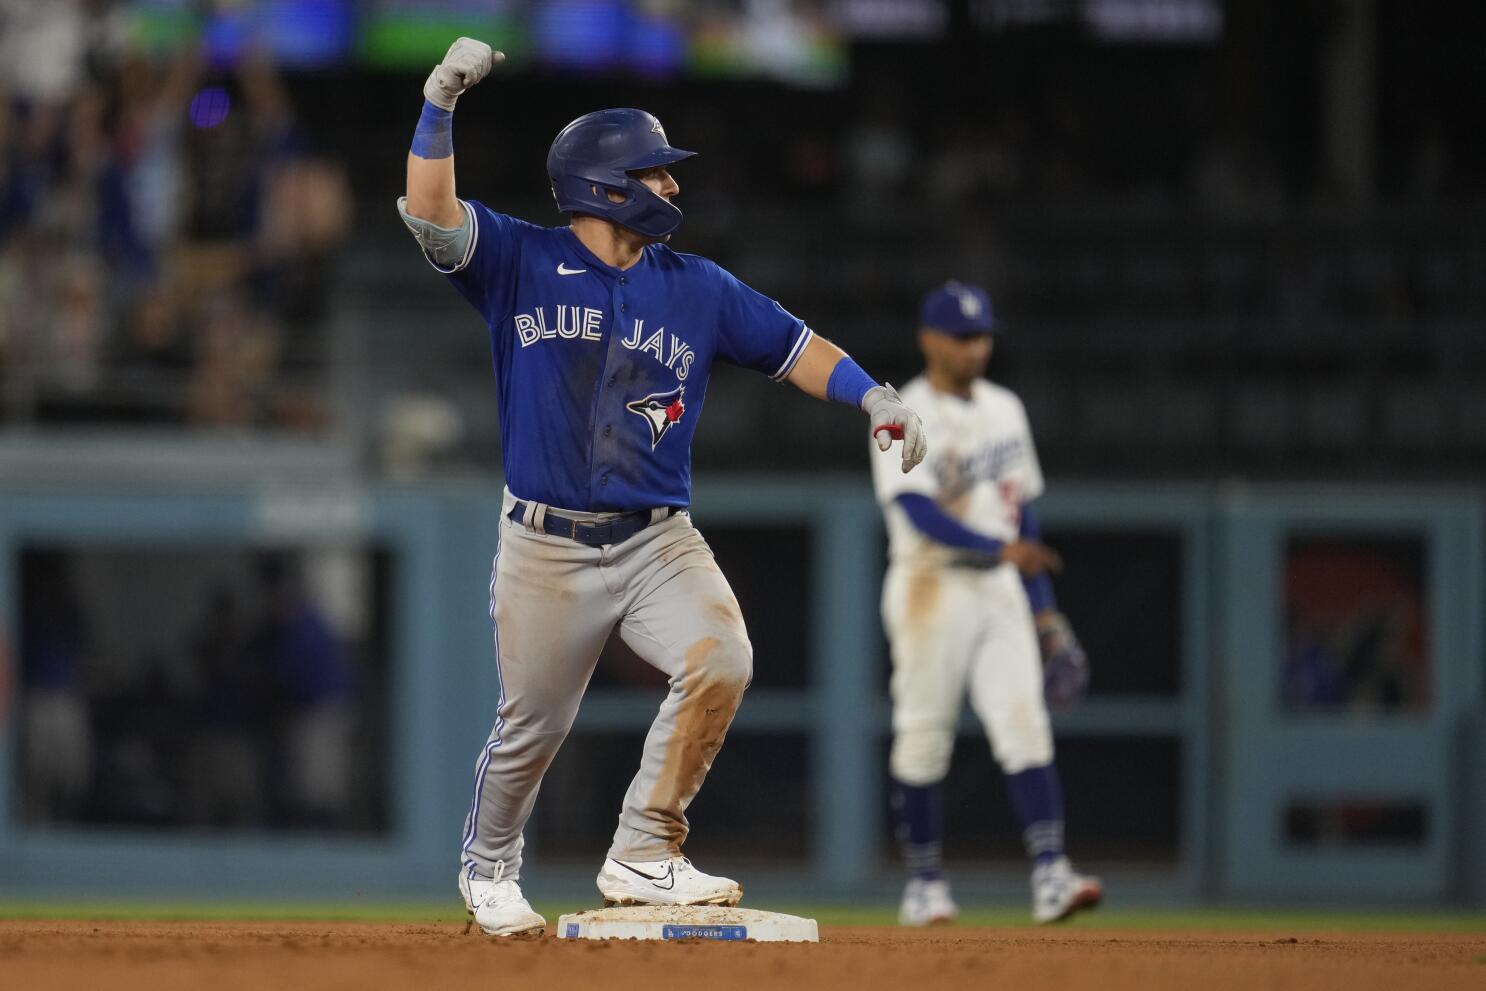 Why Max Muncy's efforts weren't enough for Dodgers against Blue